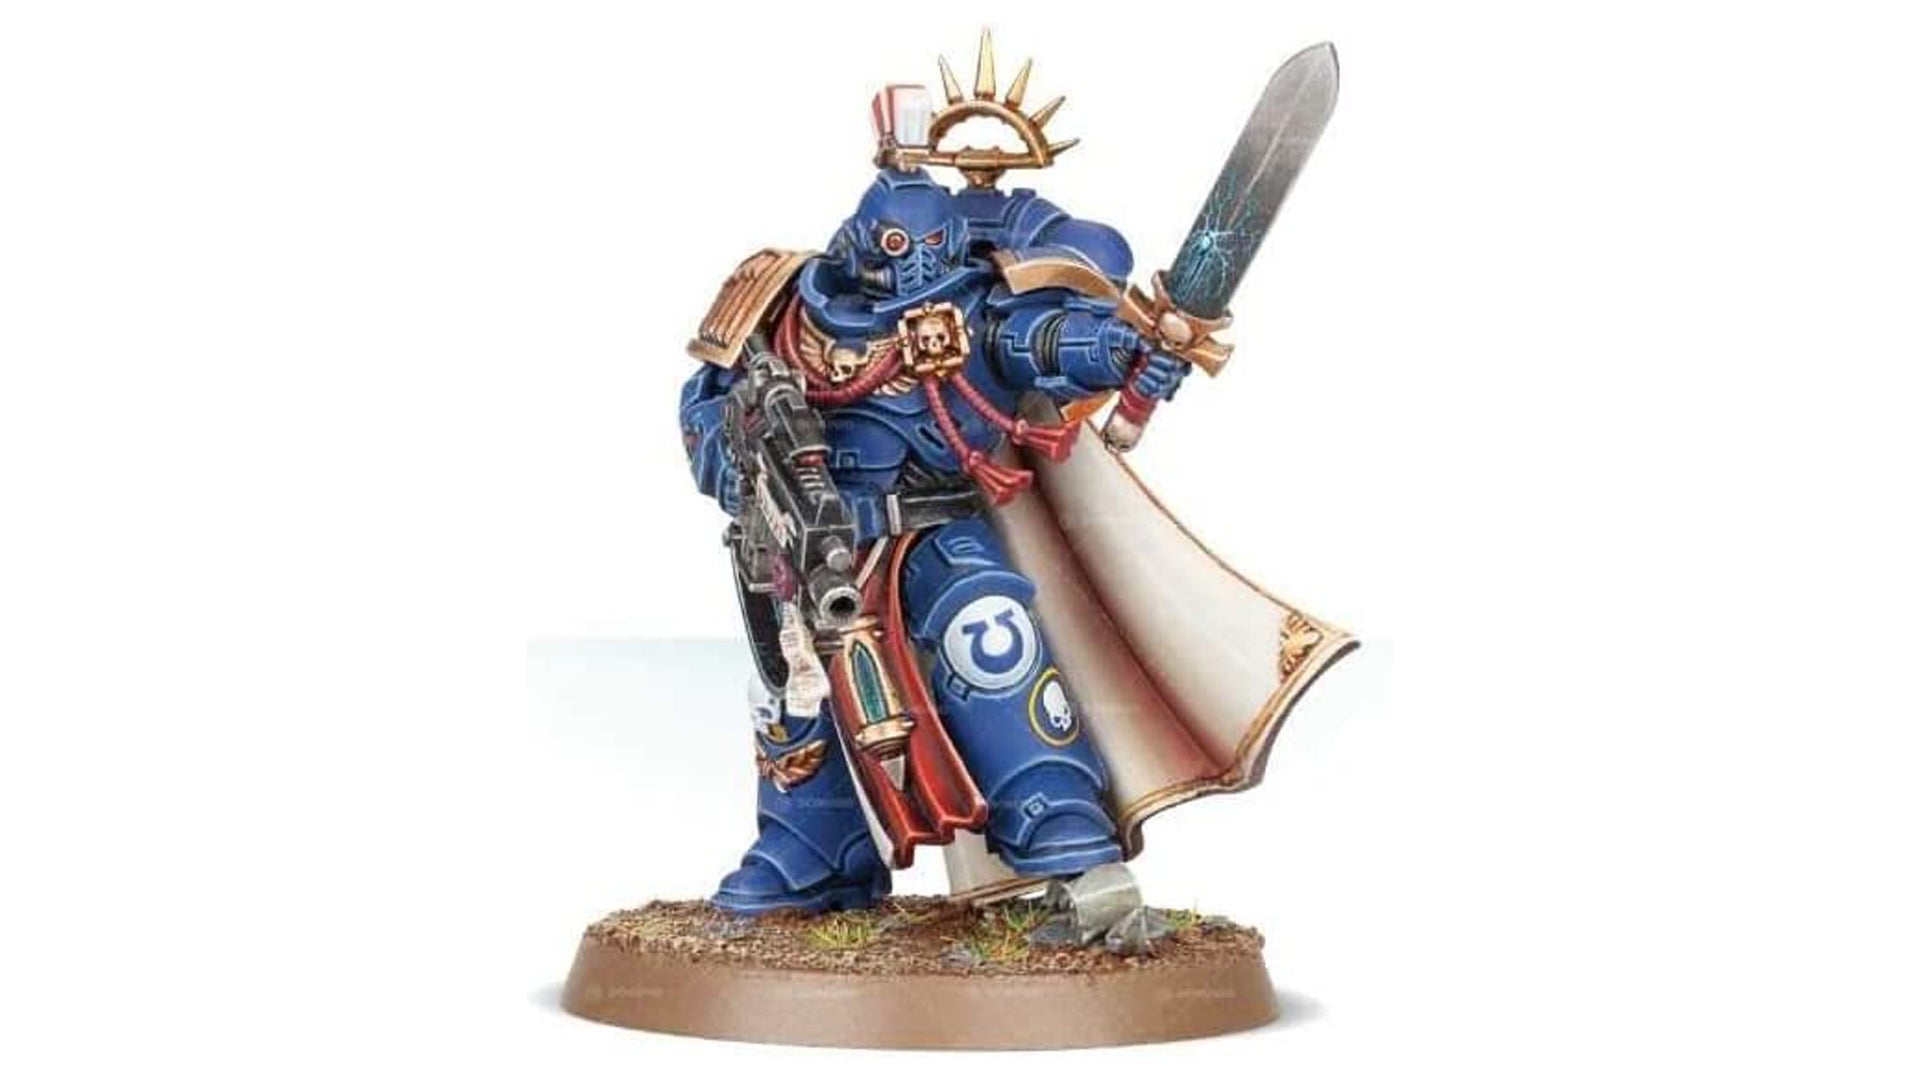 An image of a model for Warhammer 40k Space Marine Primaris Captain